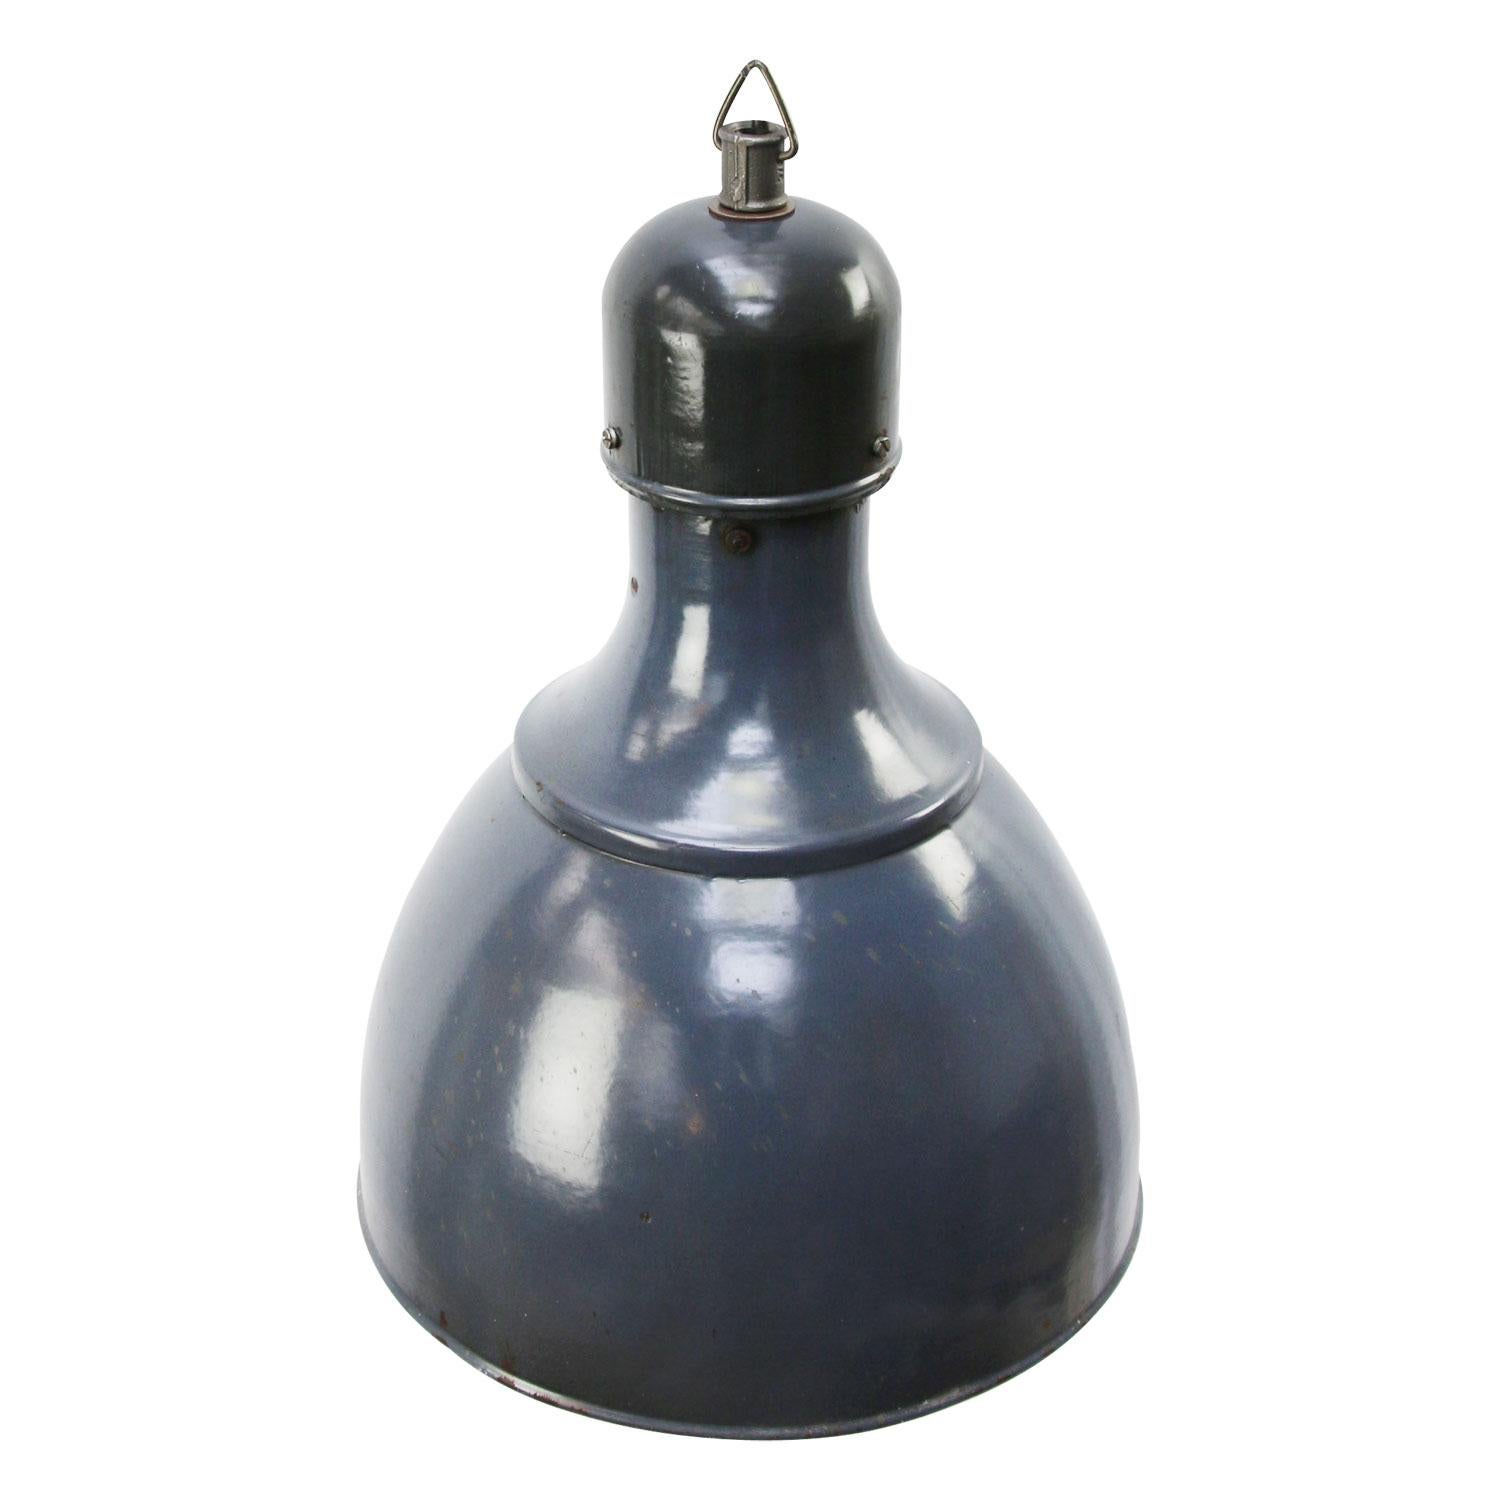 Blue large factory light blue enamel. White interior cast iron top.

Weight: 2.8 kg / 6.2 lb

Priced per individual item. All lamps have been made suitable by international standards for incandescent light bulbs, energy-efficient and LED bulbs.